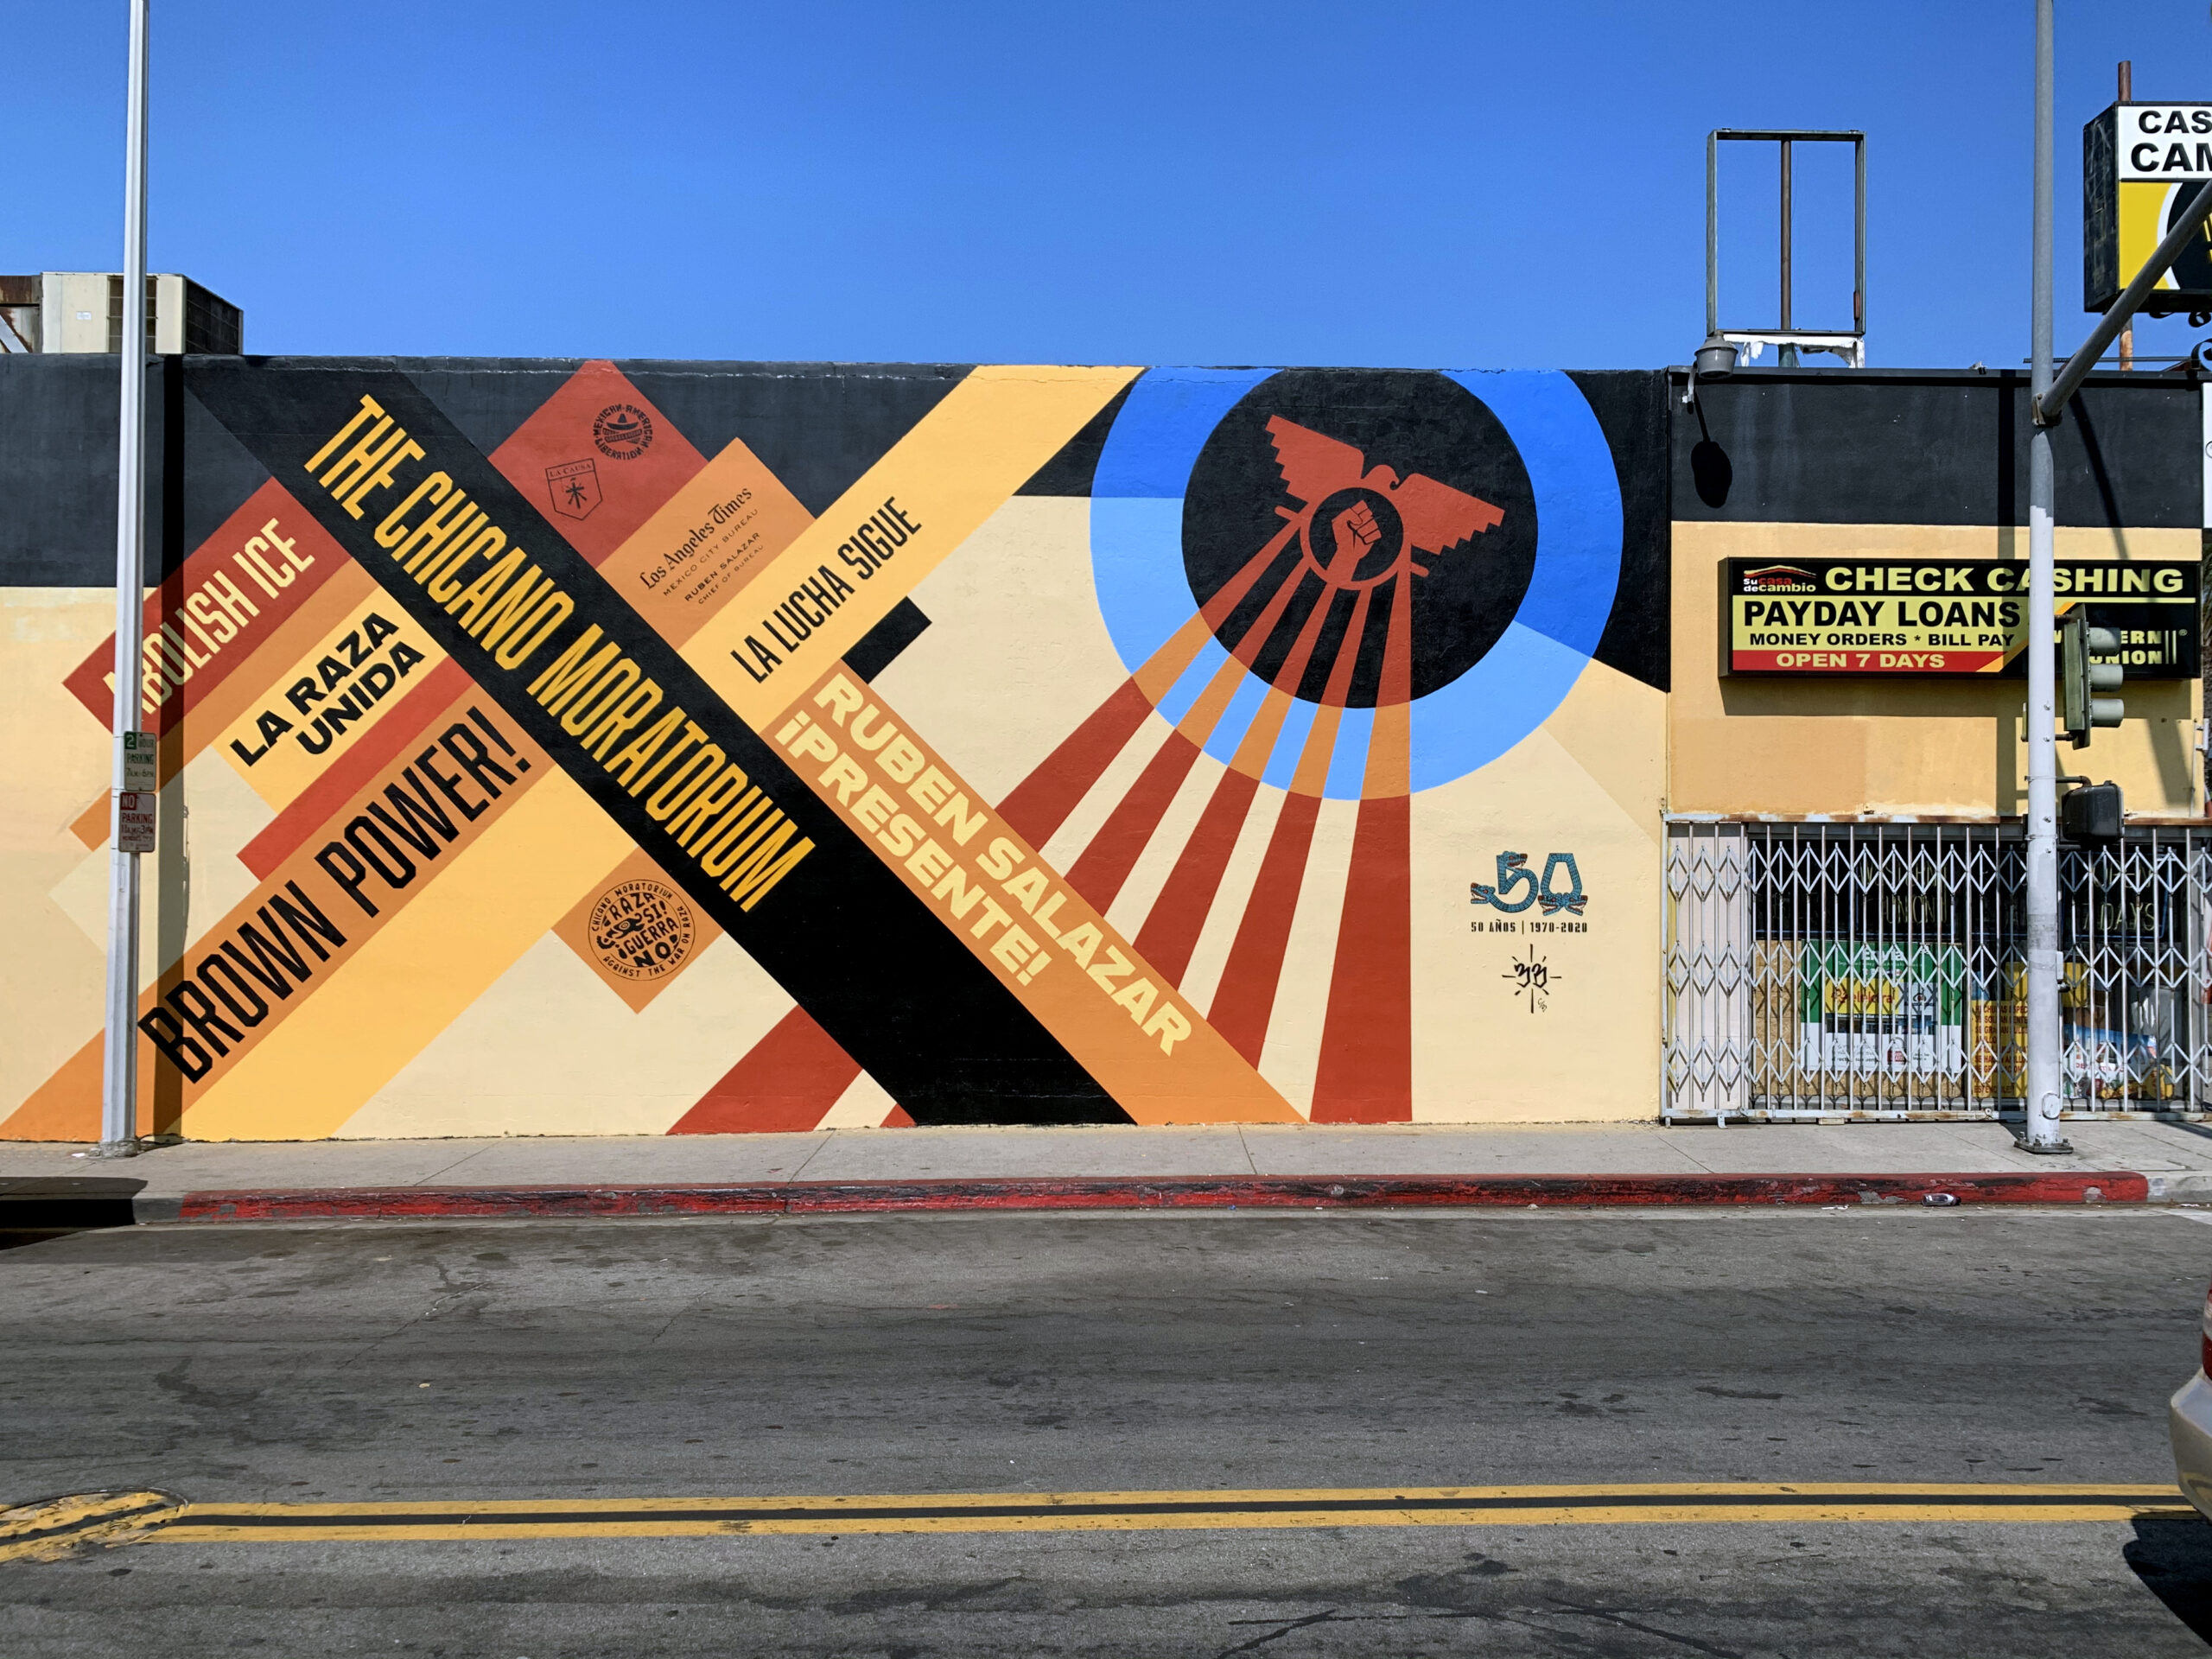 Large Geometric Mural with text and bright colors on Whittier Blvd